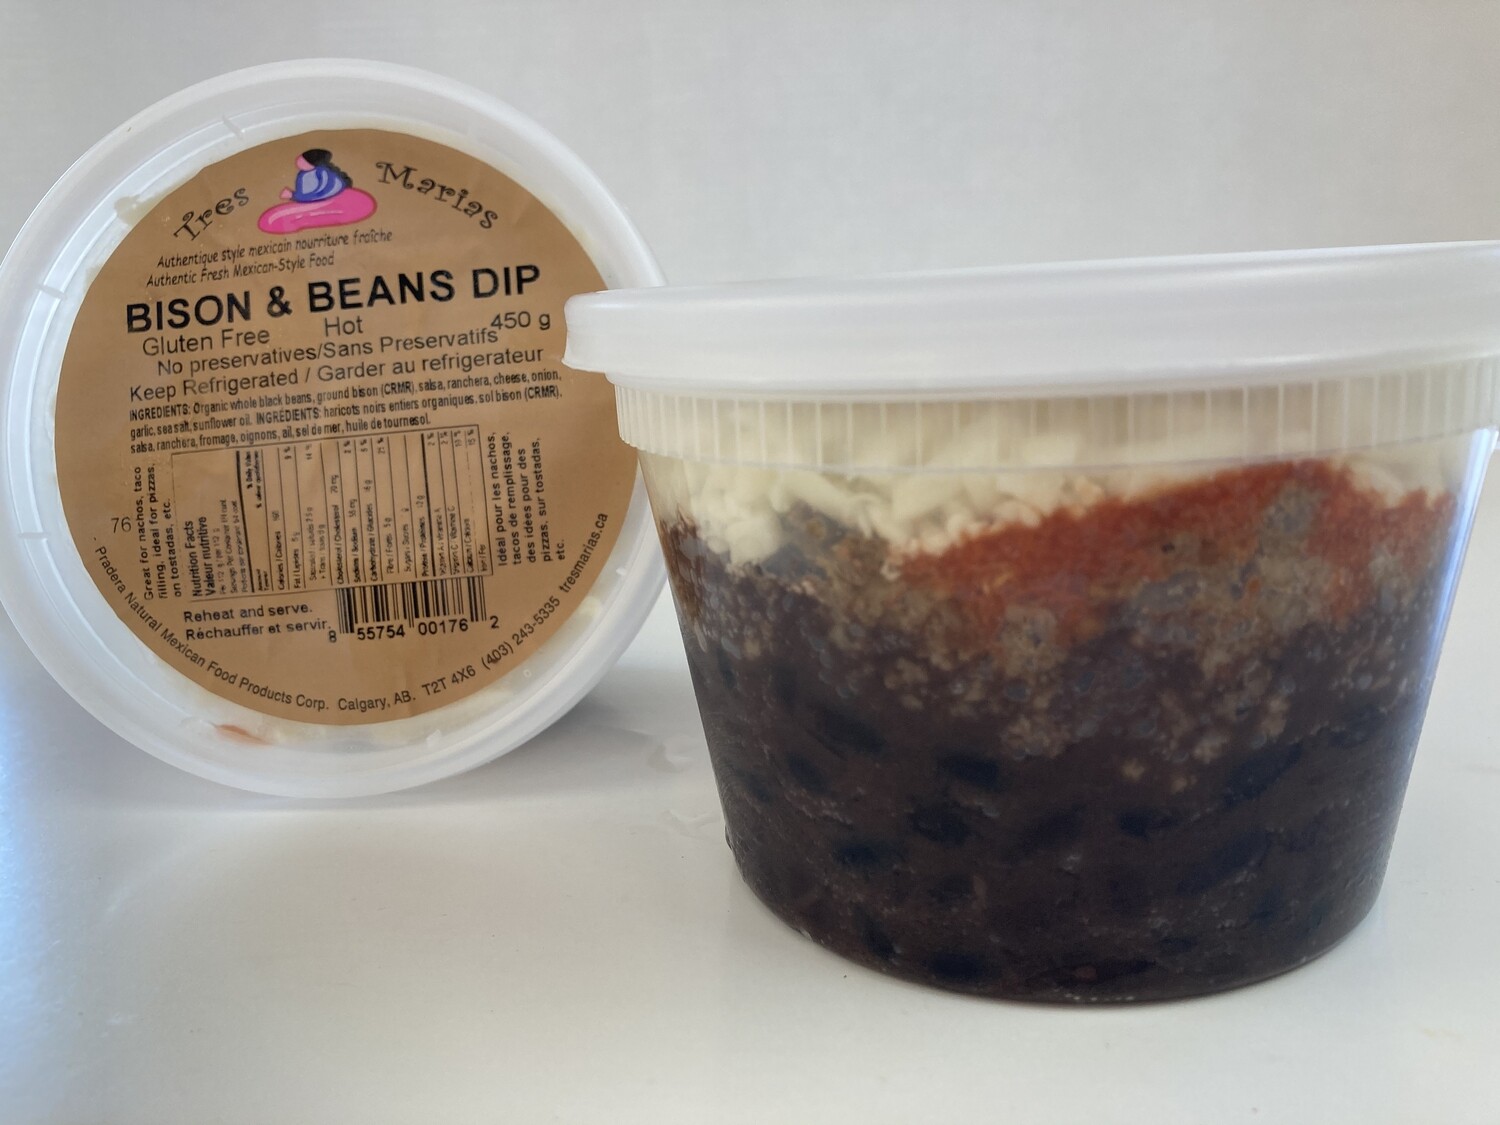 Bison & Beans Dip - Extra Hot 450 g